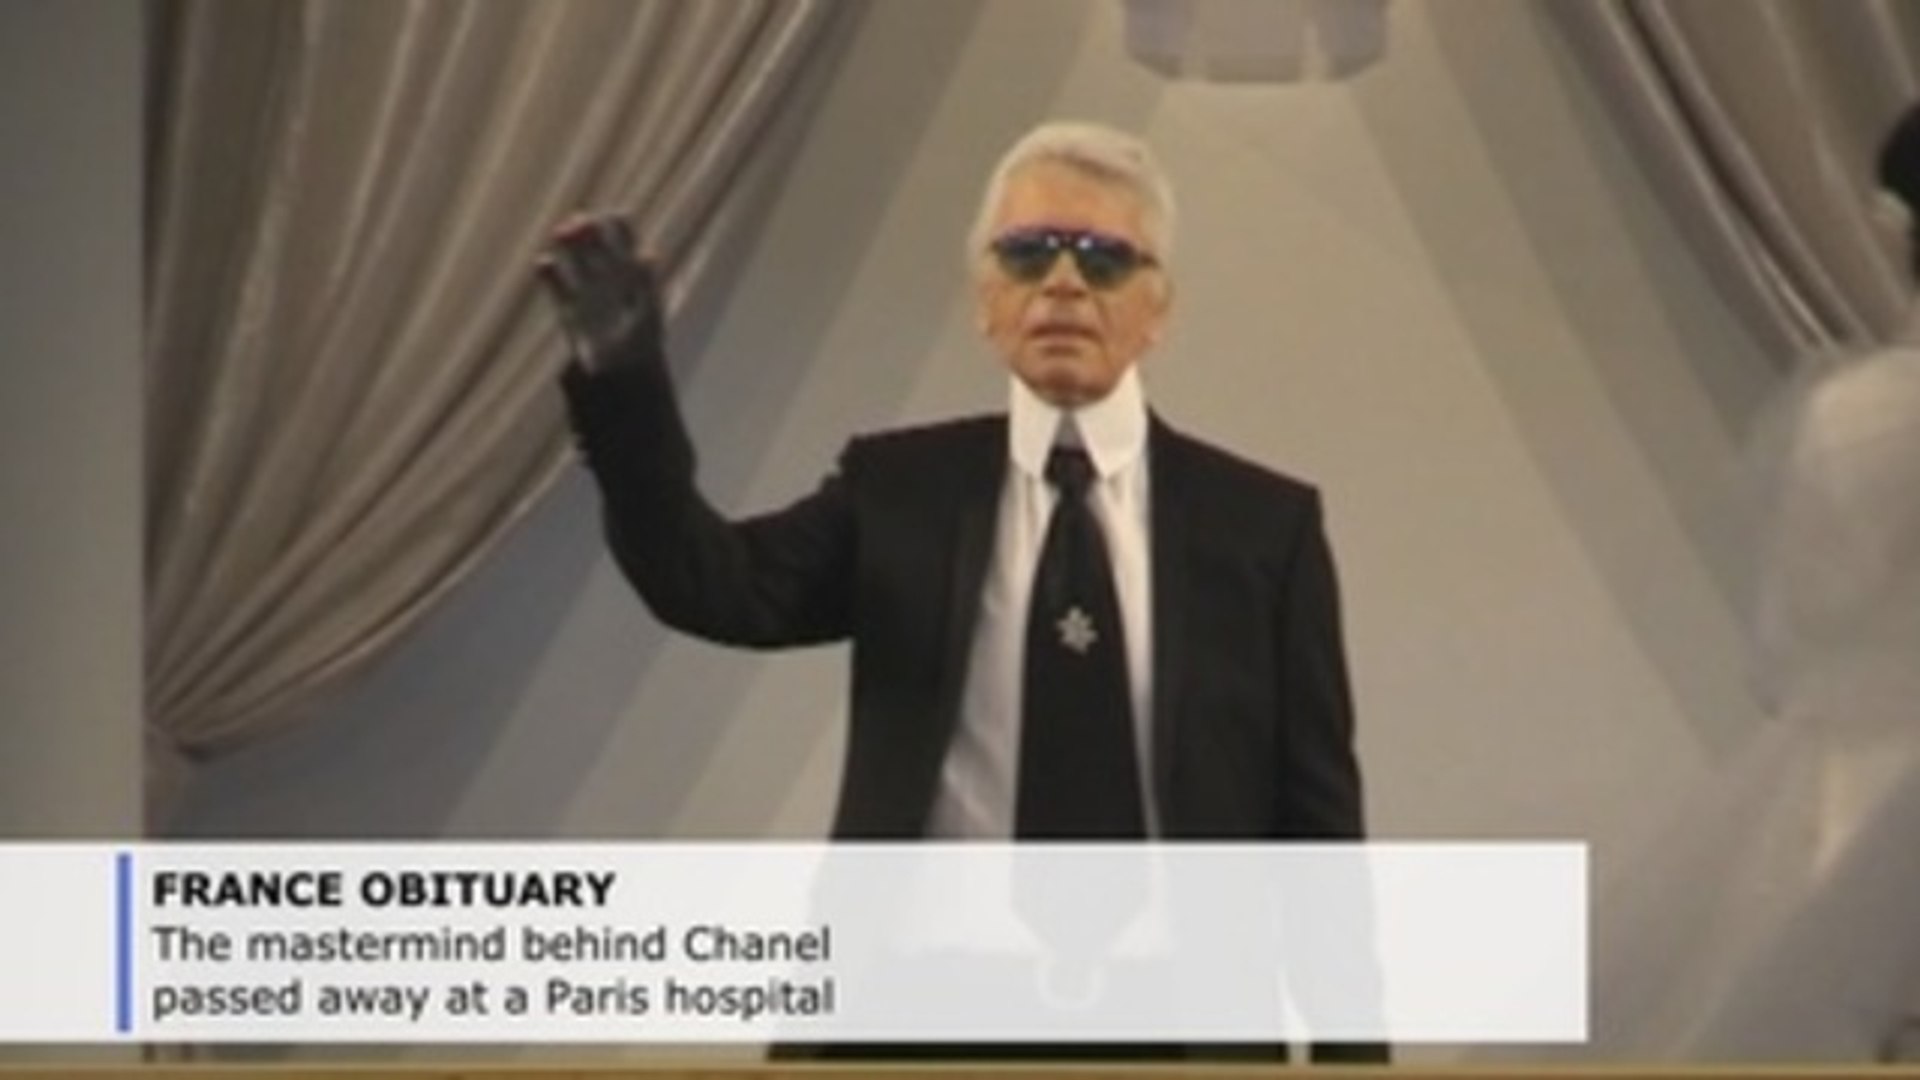 Chanel's legendary creative director, fashion icon Karl Lagerfeld dies at 85  - Vídeo Dailymotion